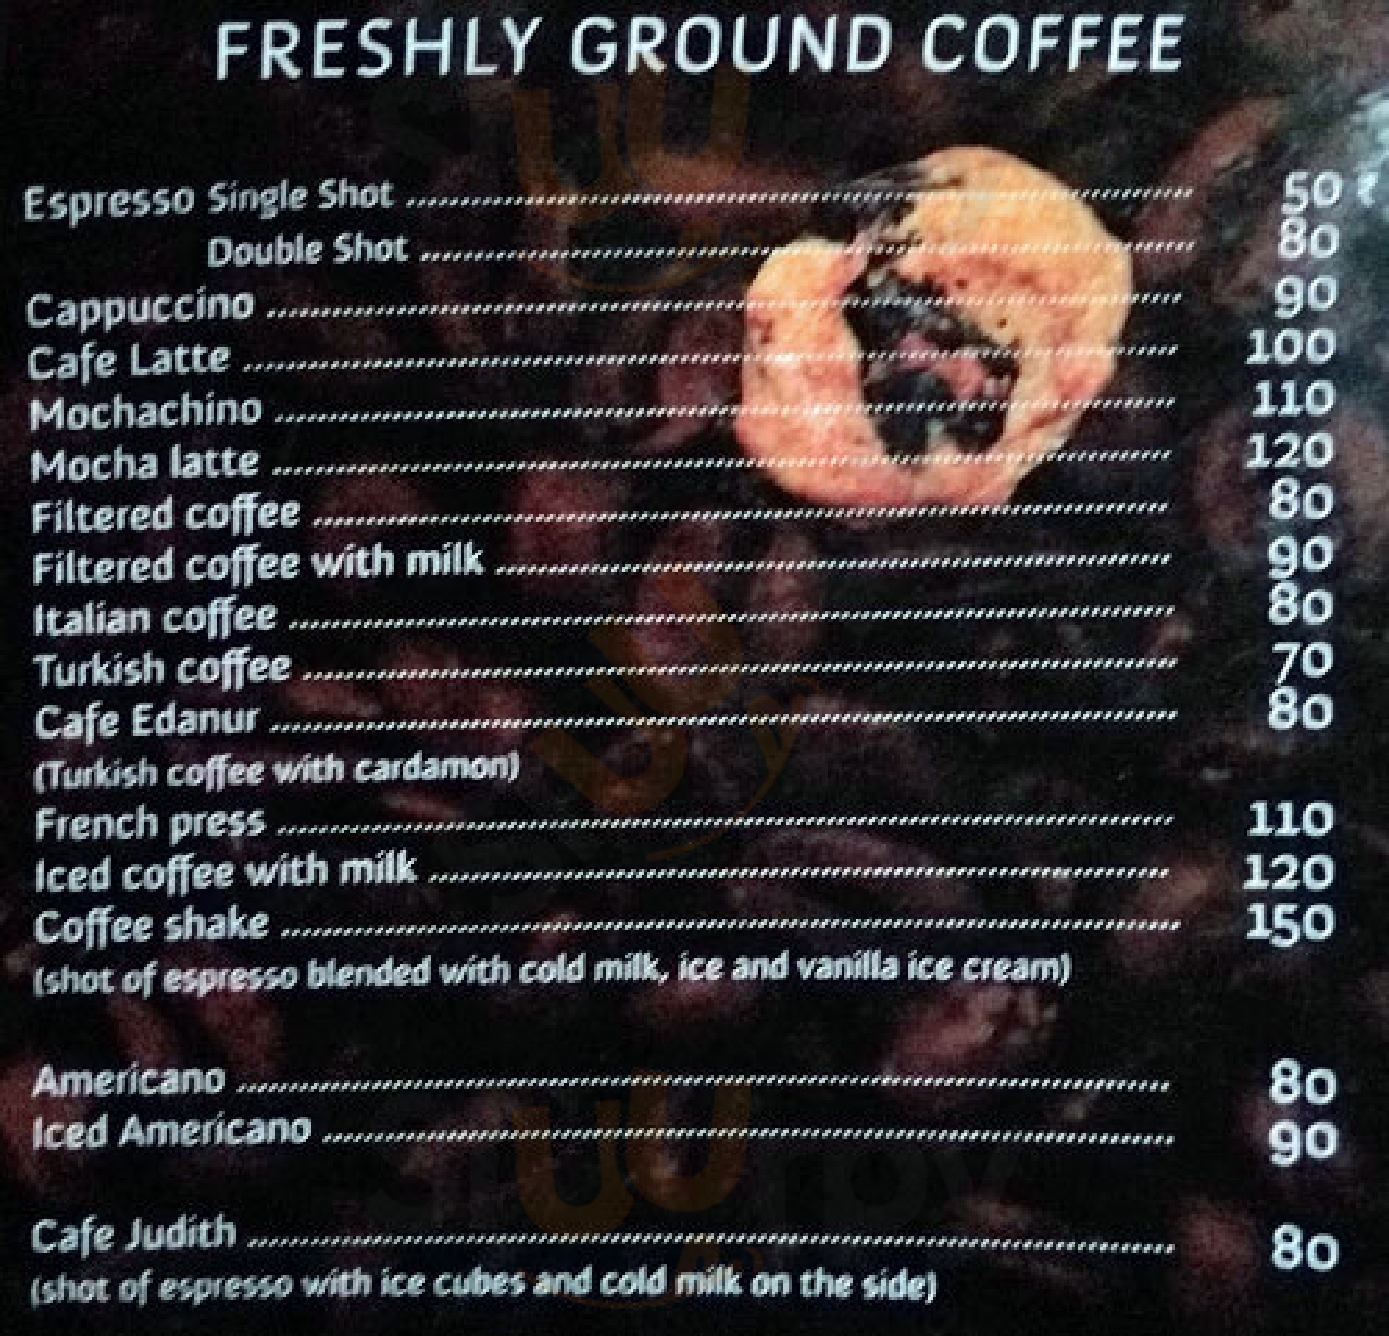 Dylan's Toasted & Roasted Coffee House Manali Menu - 1